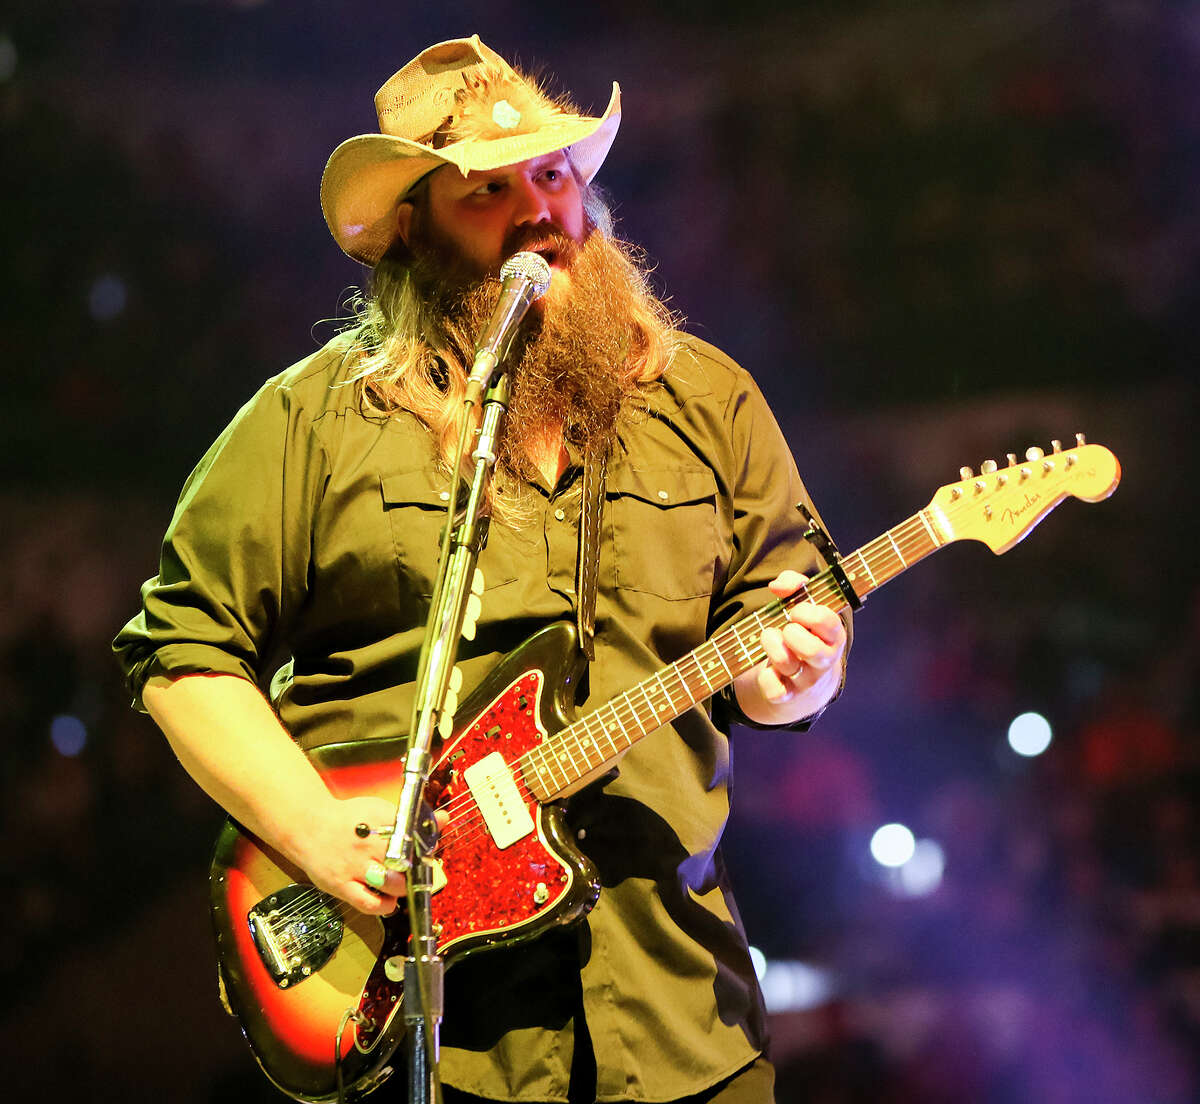 Recent Grammy winner Chris Stapleton performs in his San Antonio Rodeo & Stock Show debut at the AT&T Center on Saturday, Feb. 27, 2016. MARVIN PFEIFFER/ mpfeiffer@express-news.net